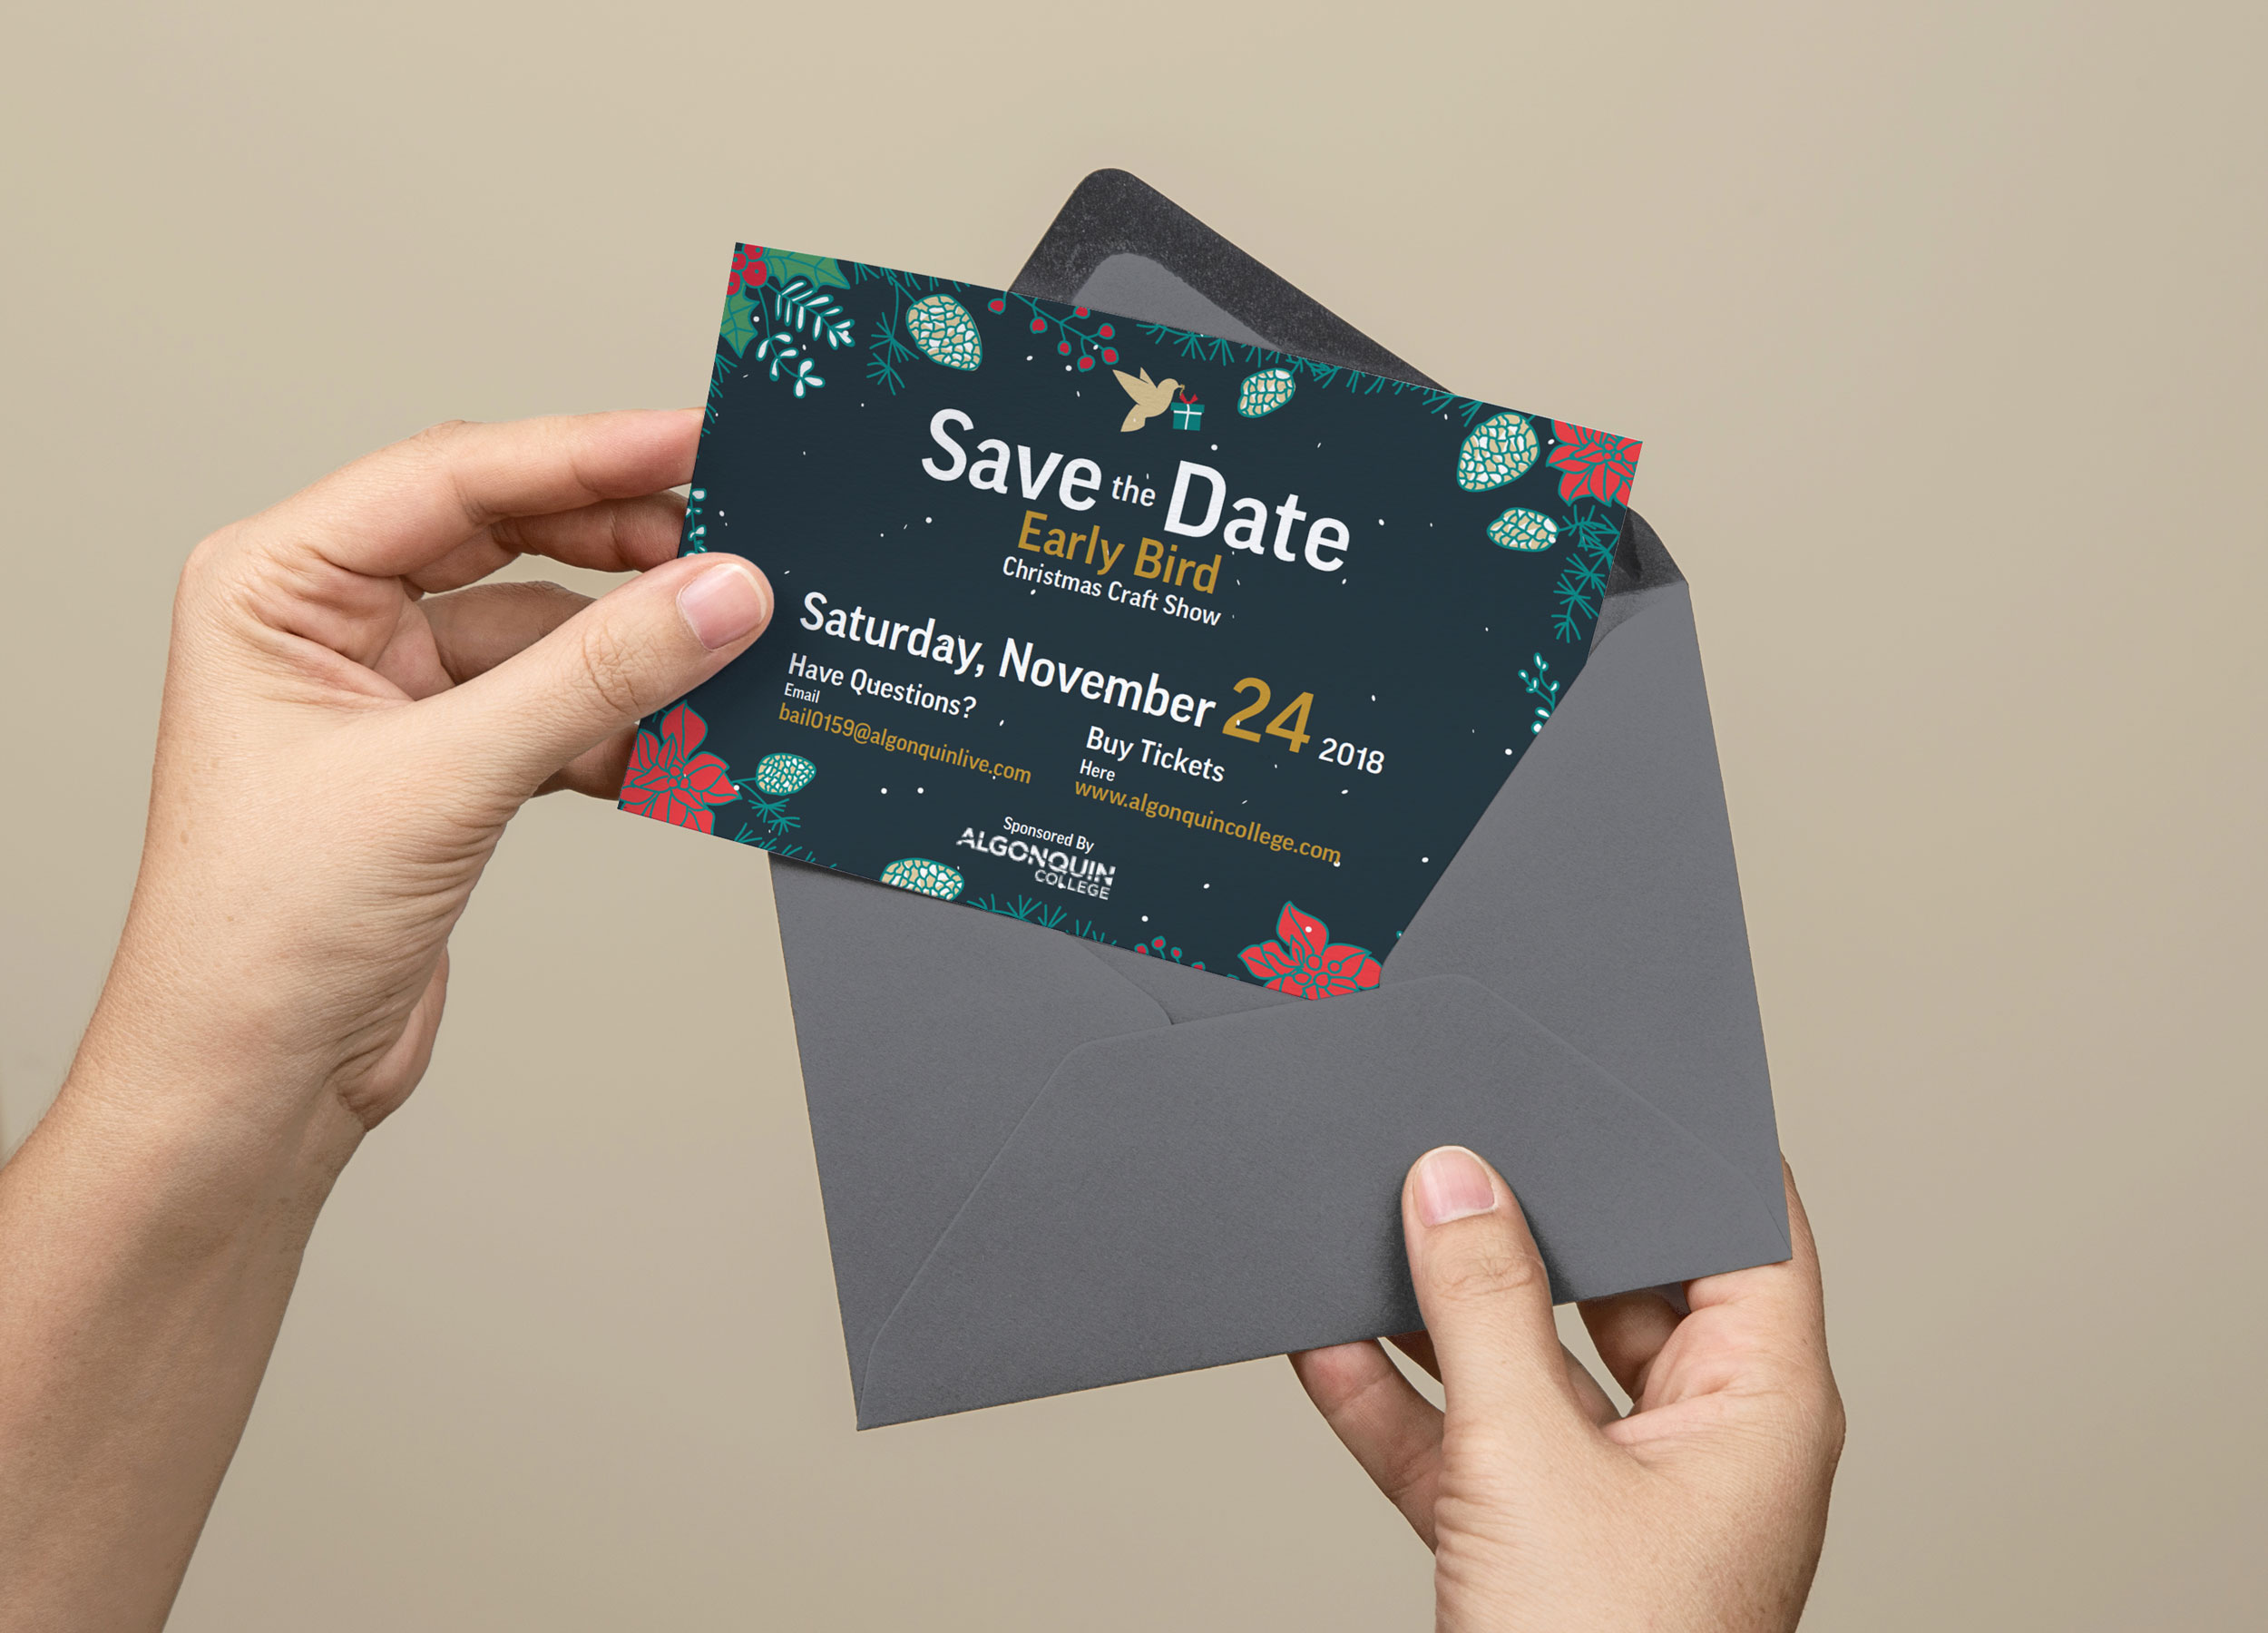 Someone pulling a save the date flyer for a Christmas craft show out of an envelope